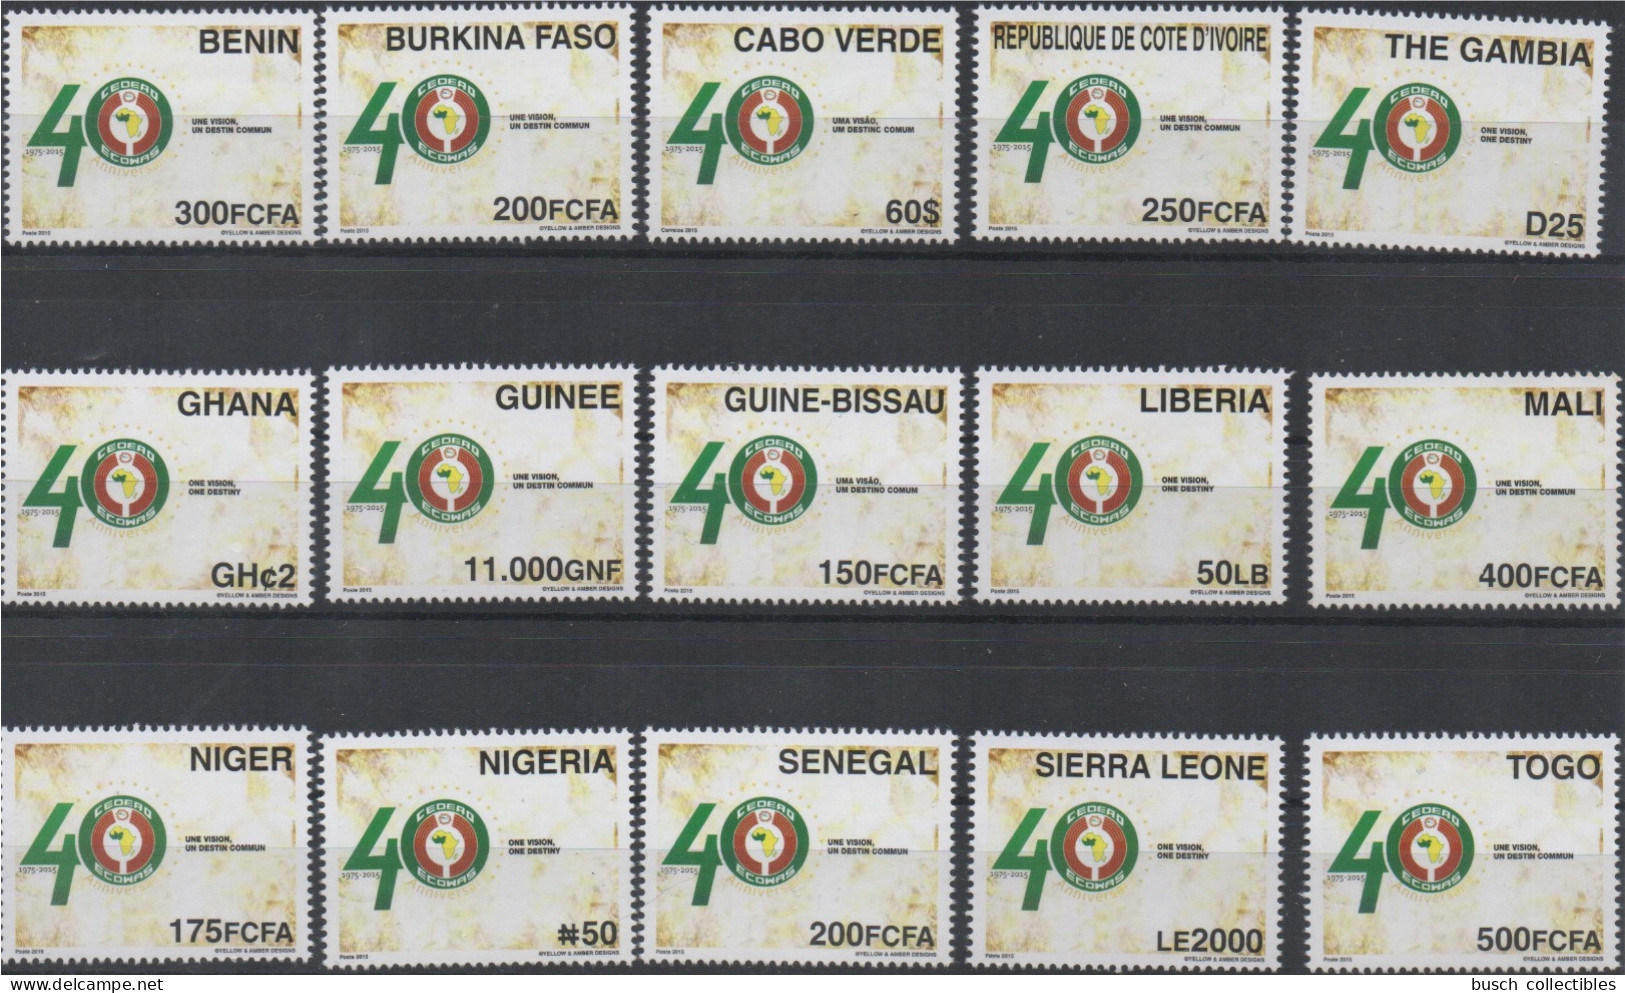 2015 Joint Issue Emission Commune CEDEAO ECOWAS 40 Years ALL 15 Countries MNH Benin Senegal Togo Nigeria Burkina Guine - Cape Verde